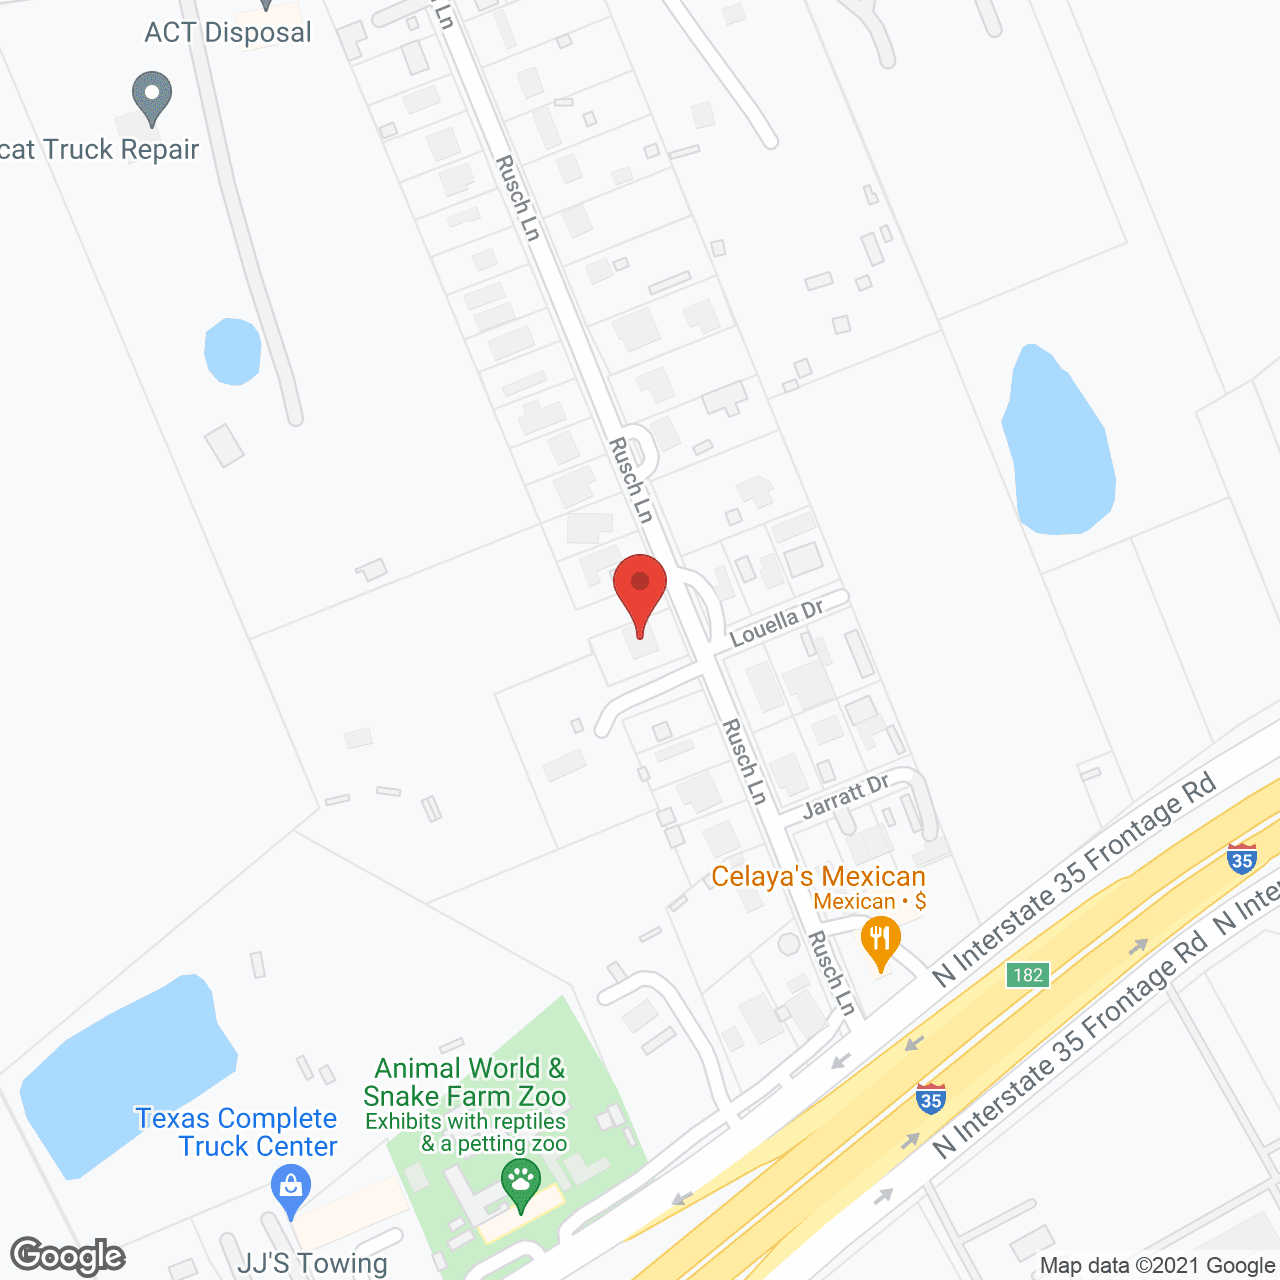 Another Alternative Personal in google map